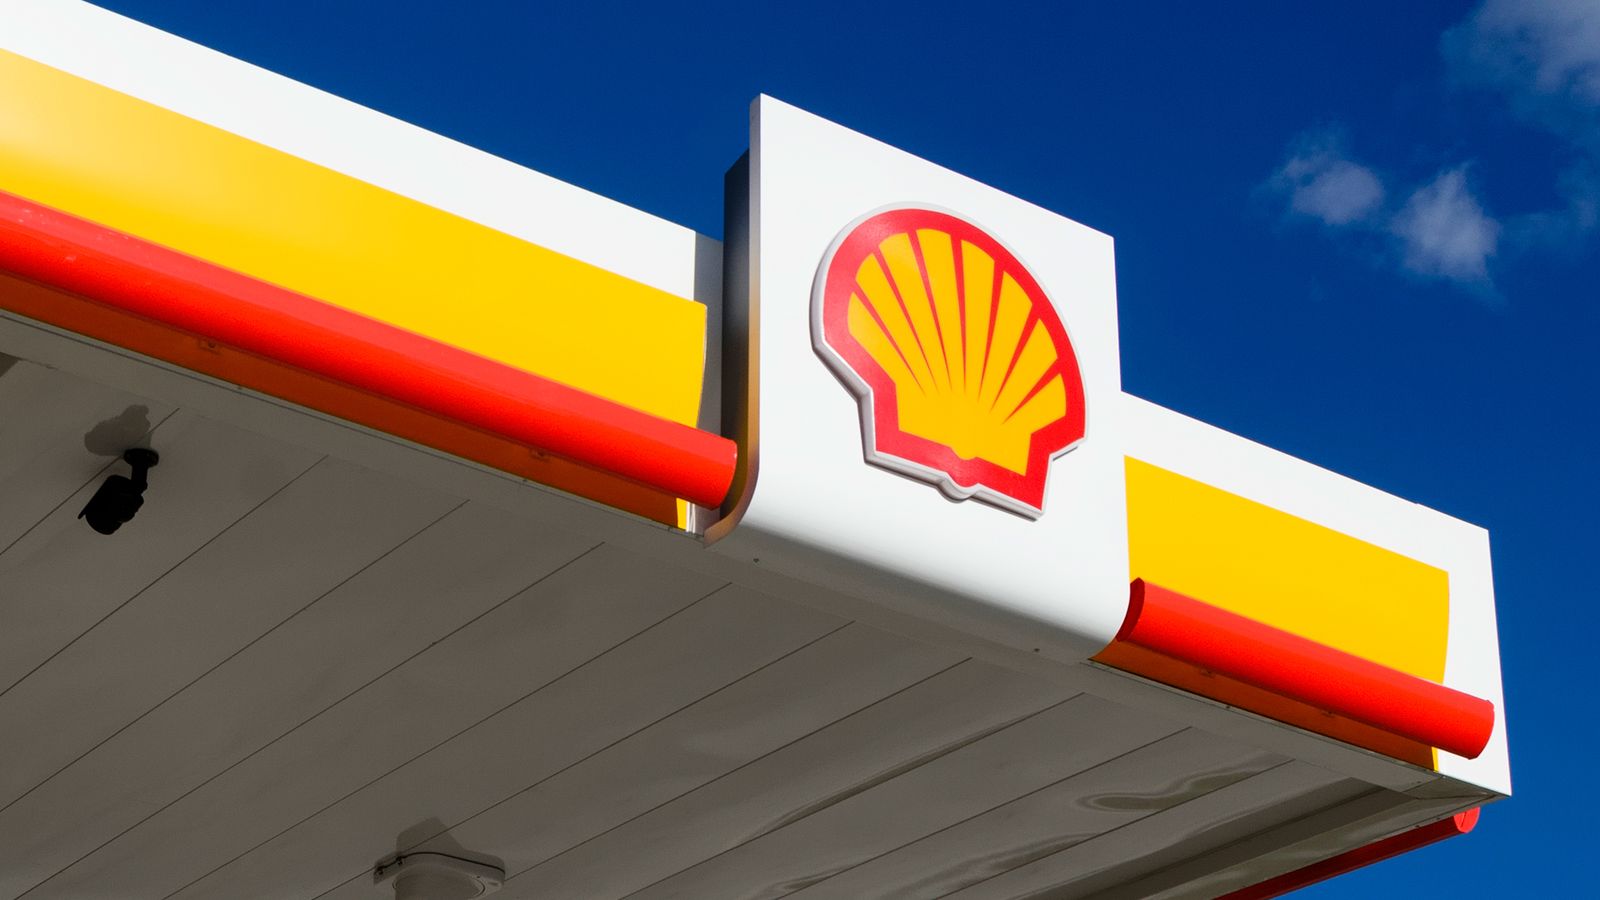 Shell Beats Expectations, Posts Strong Earnings